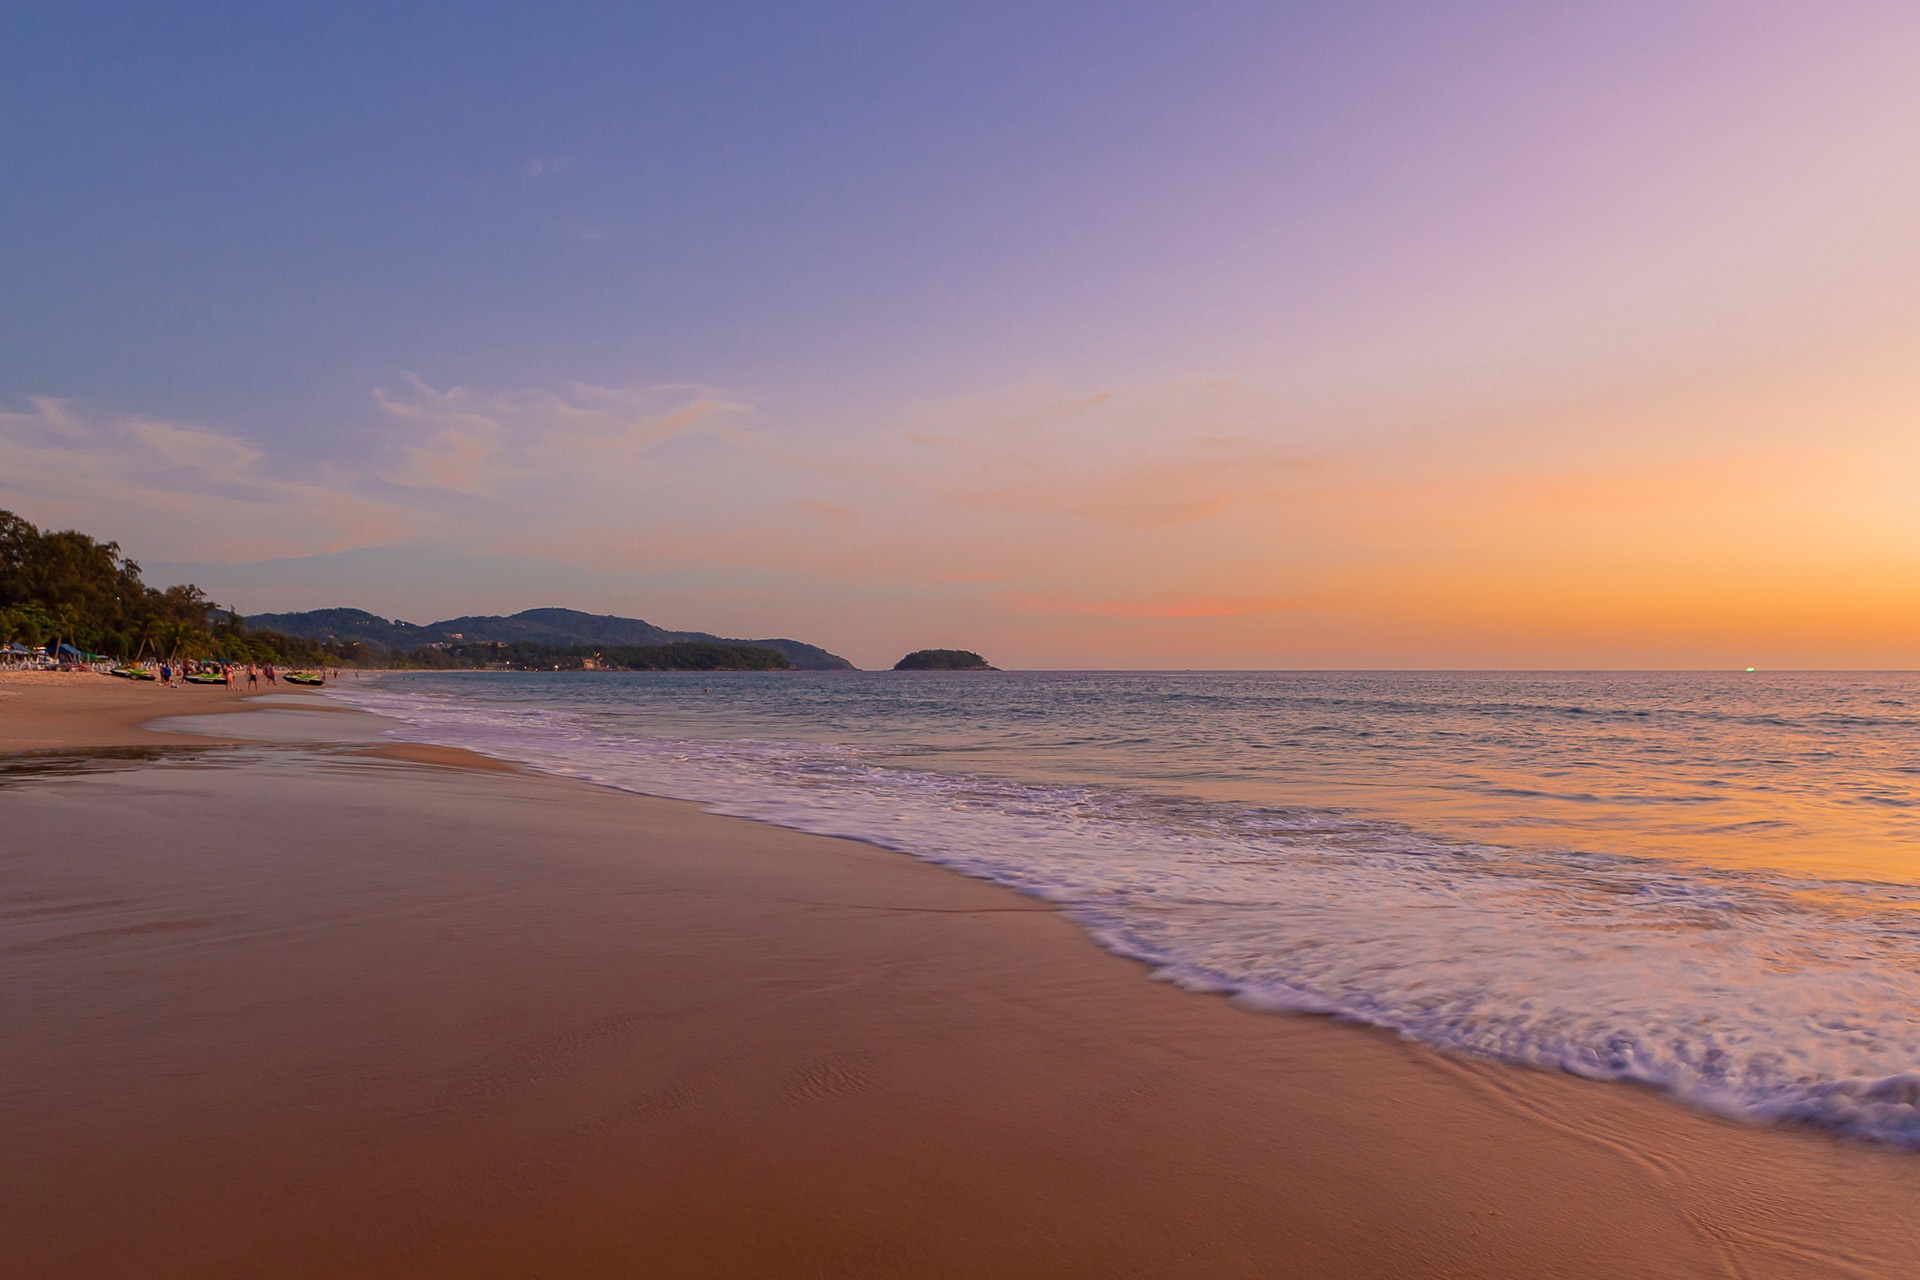 Karon Beach during sunset with the view of Poo island